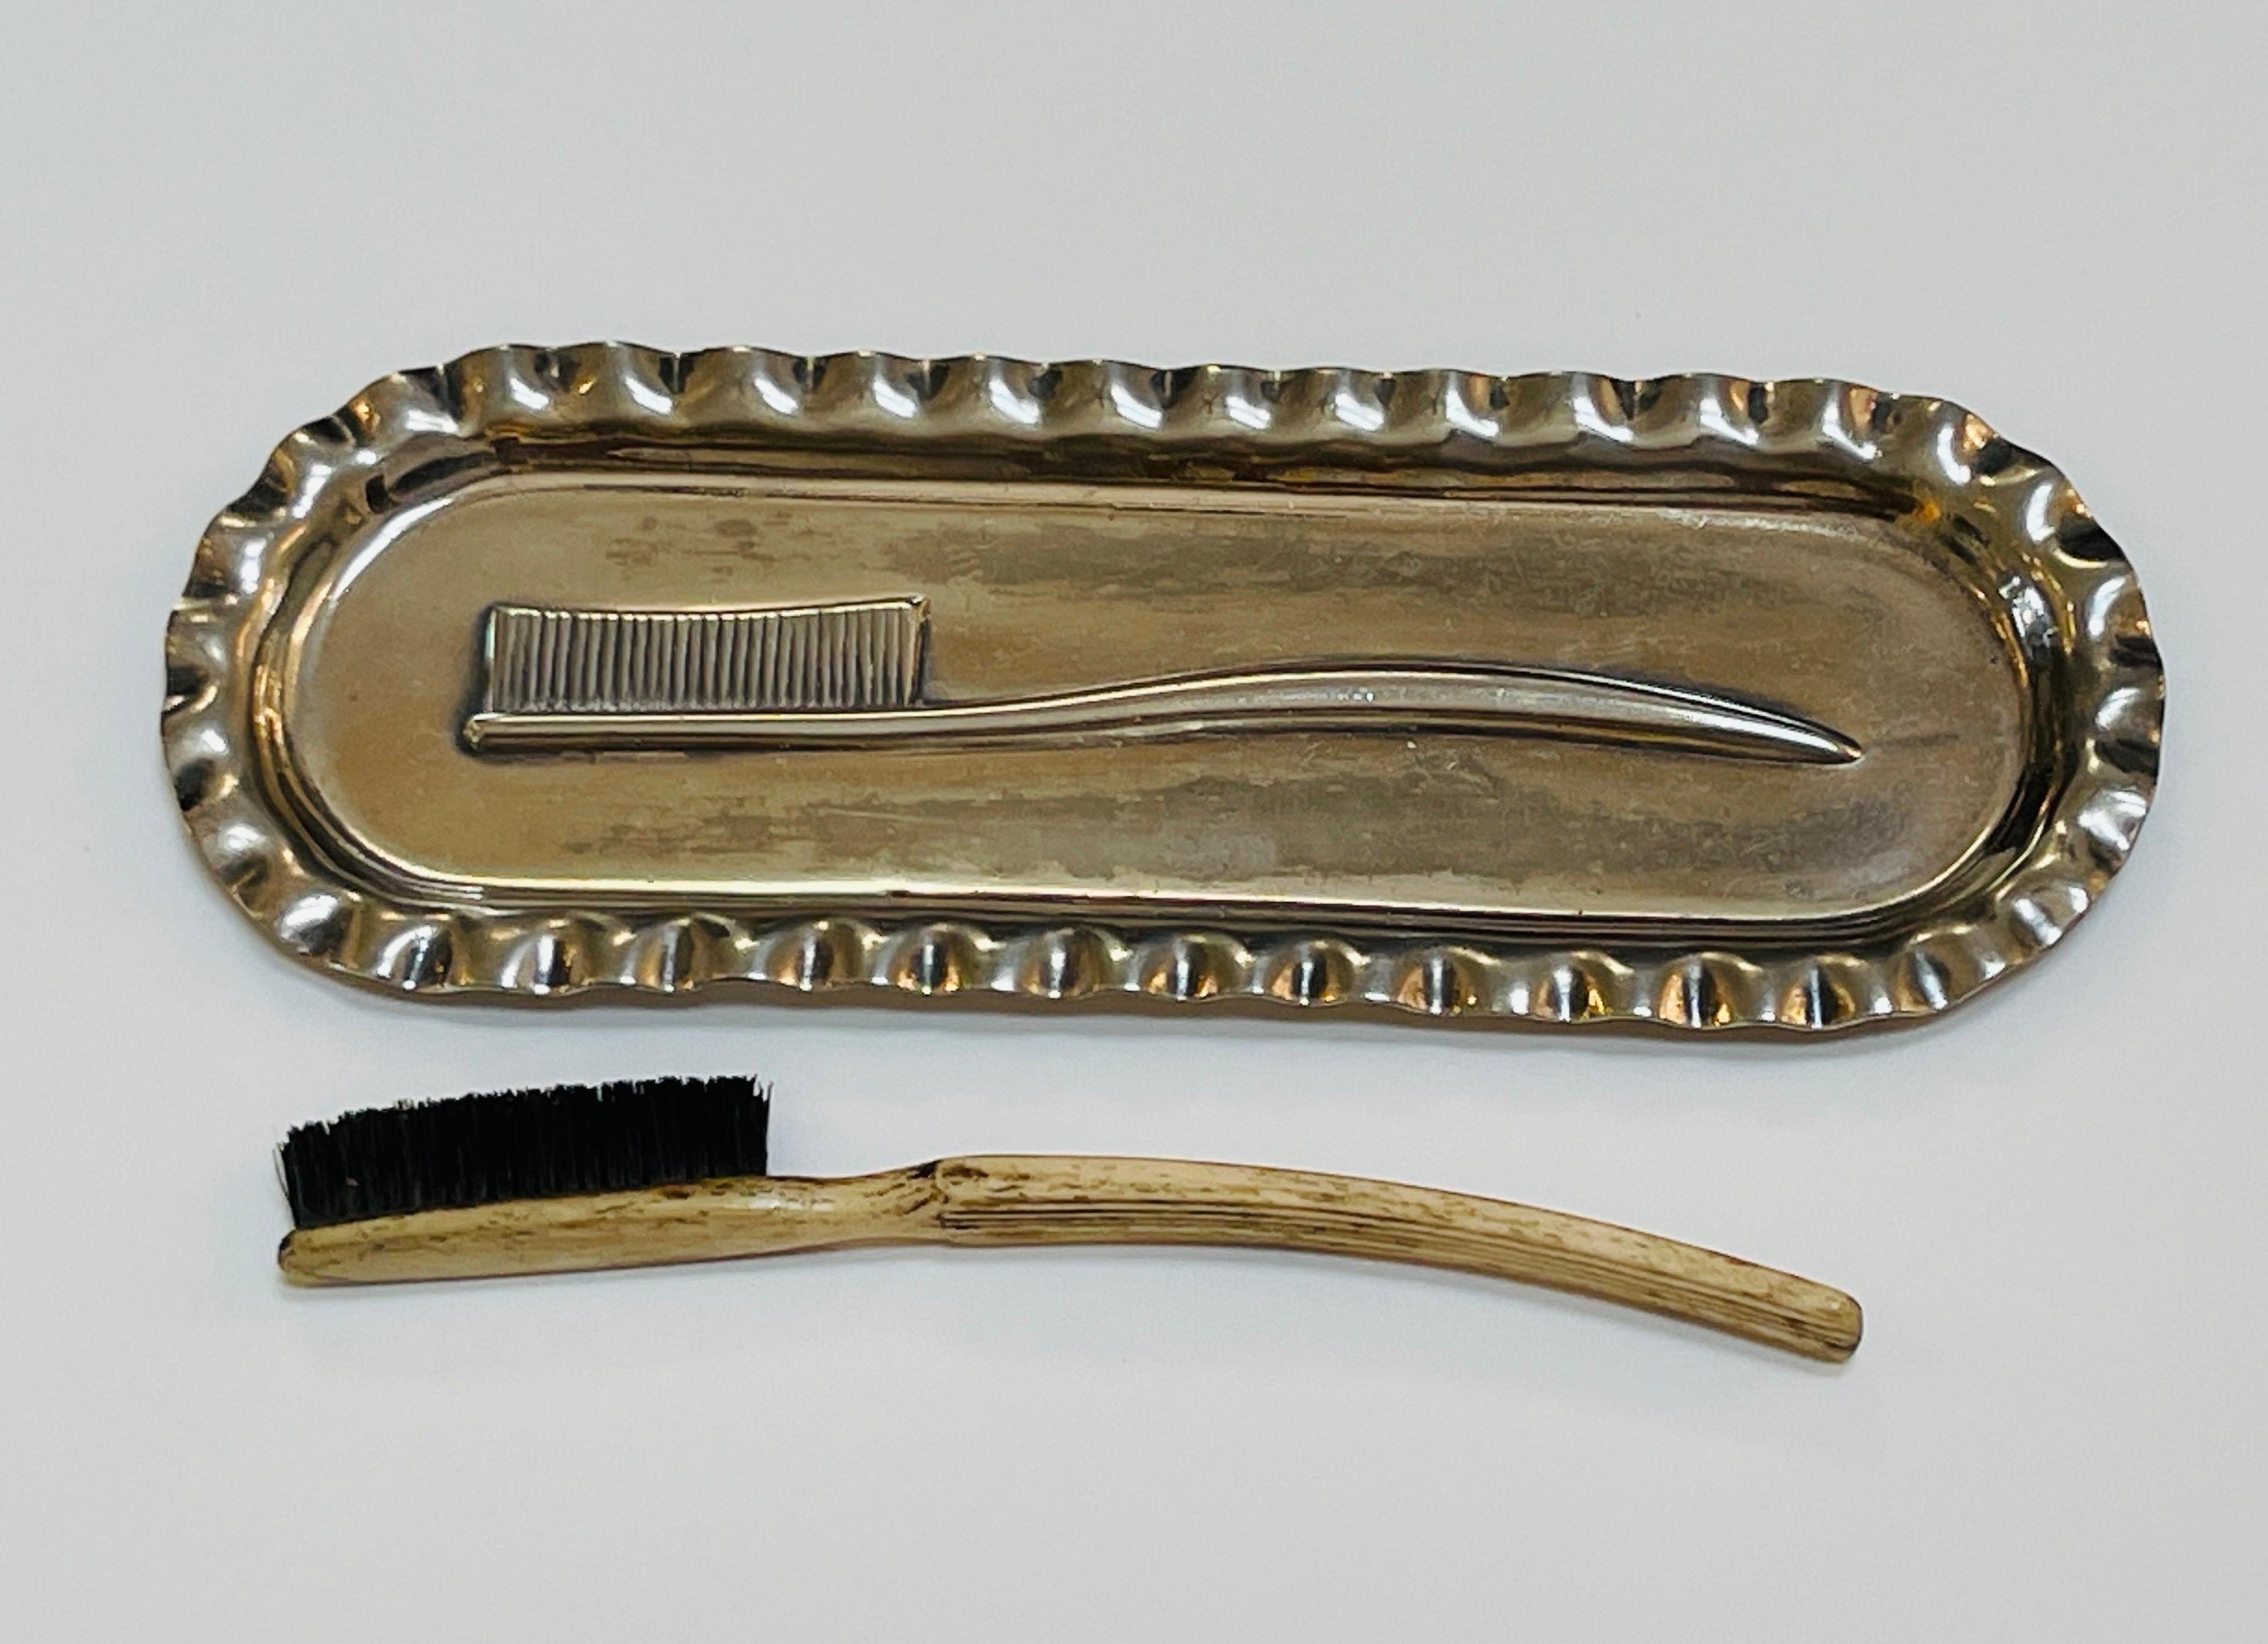 Victorian Silverplated Toothbrush Tray & Brush Set by James W. Tufts Co, Boston 
USA, Circa 1890-1900

A rare and unique find of a luxury antique dentistry artifact set. 
Made by one of the innovative Silverplate manufacturers, James W. Tufts